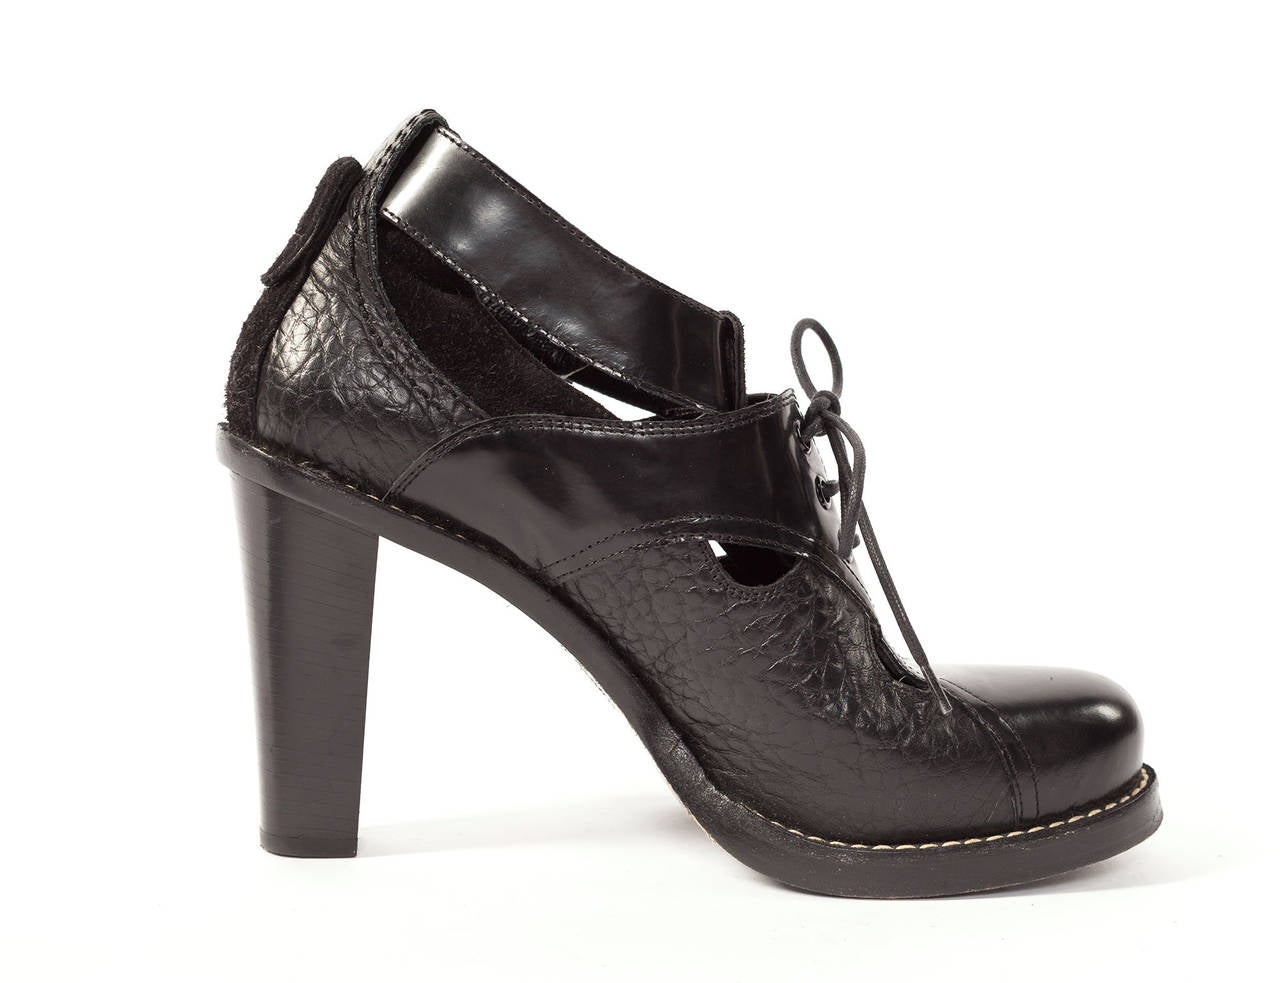 Women's Balenciaga By Nicolas Ghesquire Ankle boots with multi straps and closures